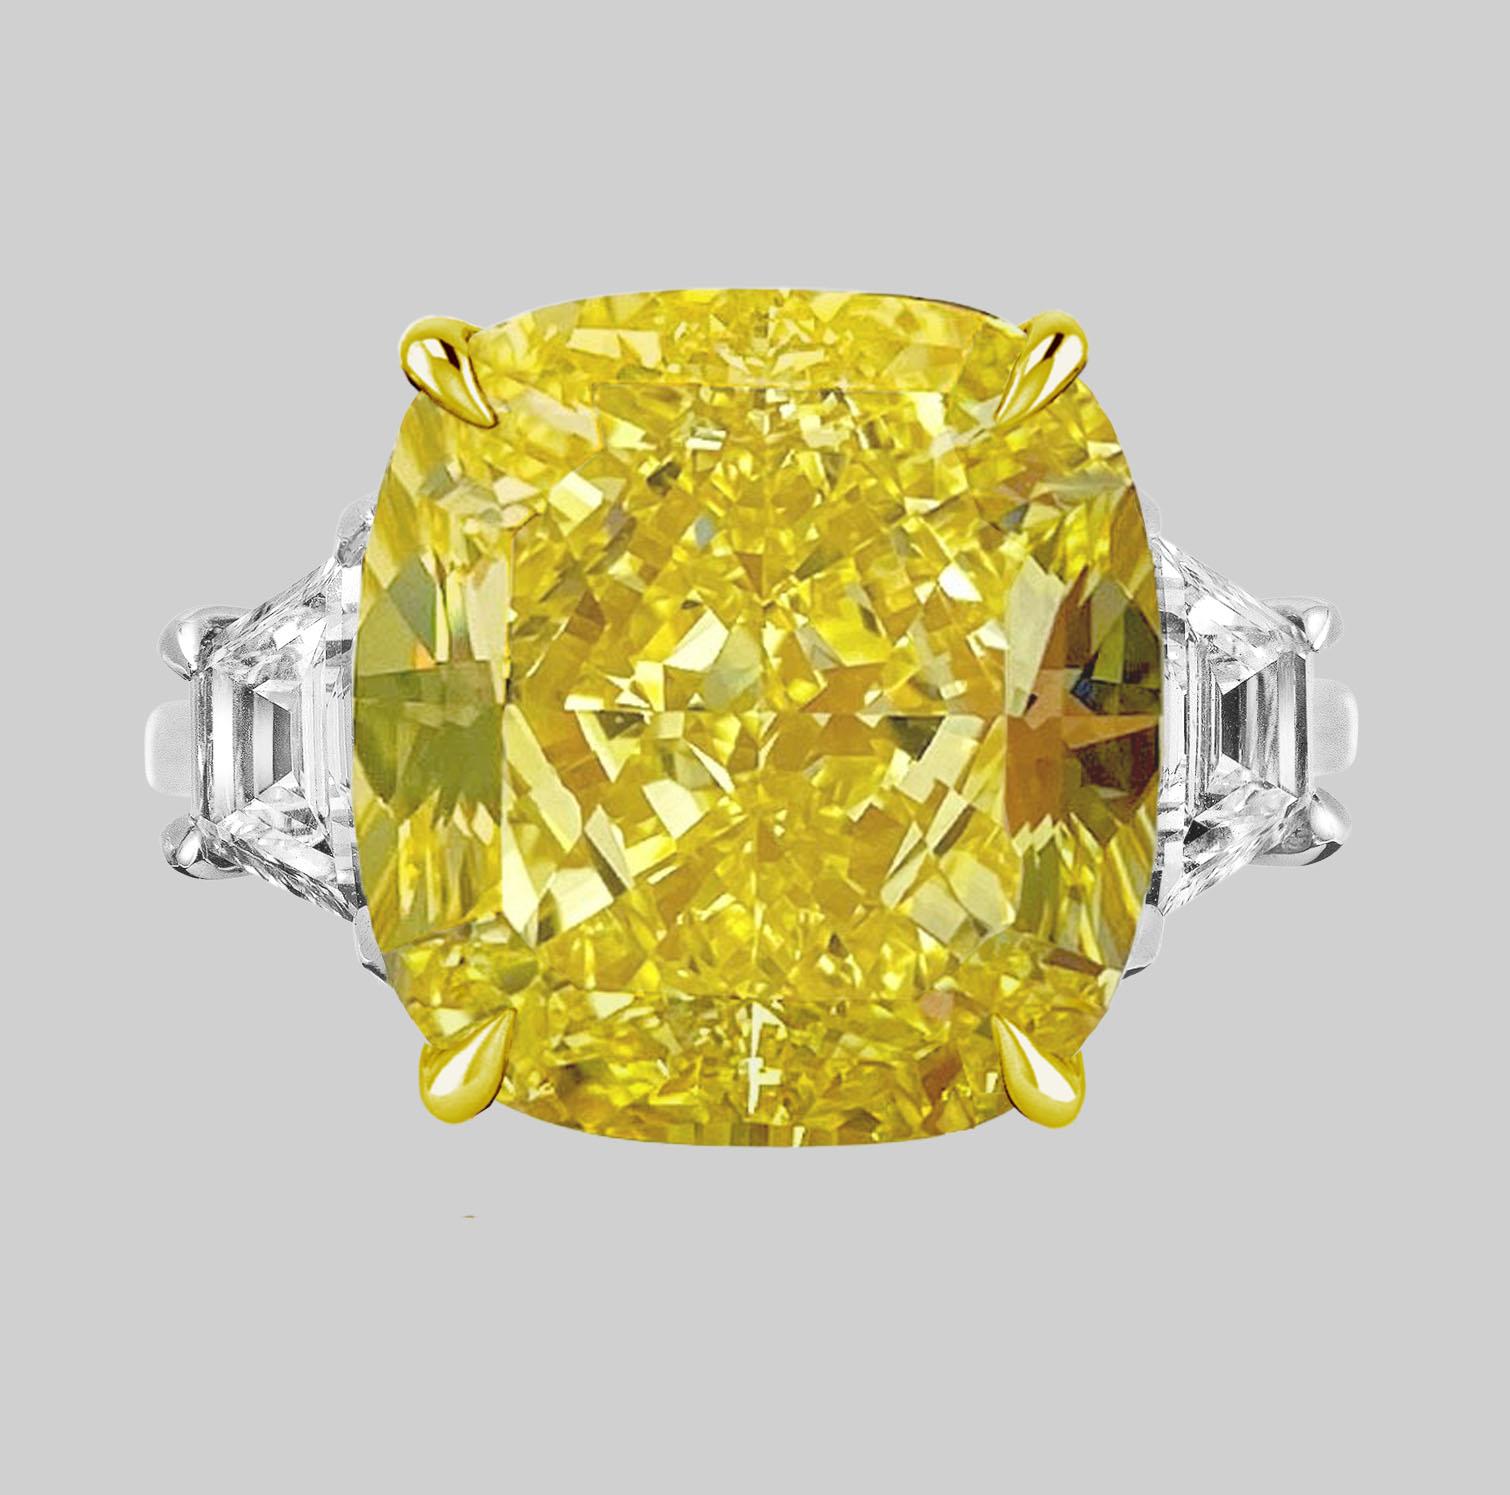 Modern Made in Italy GIA Certified 6 Carat Fancy Yellow Diamond Ring VVS2 Clarity For Sale